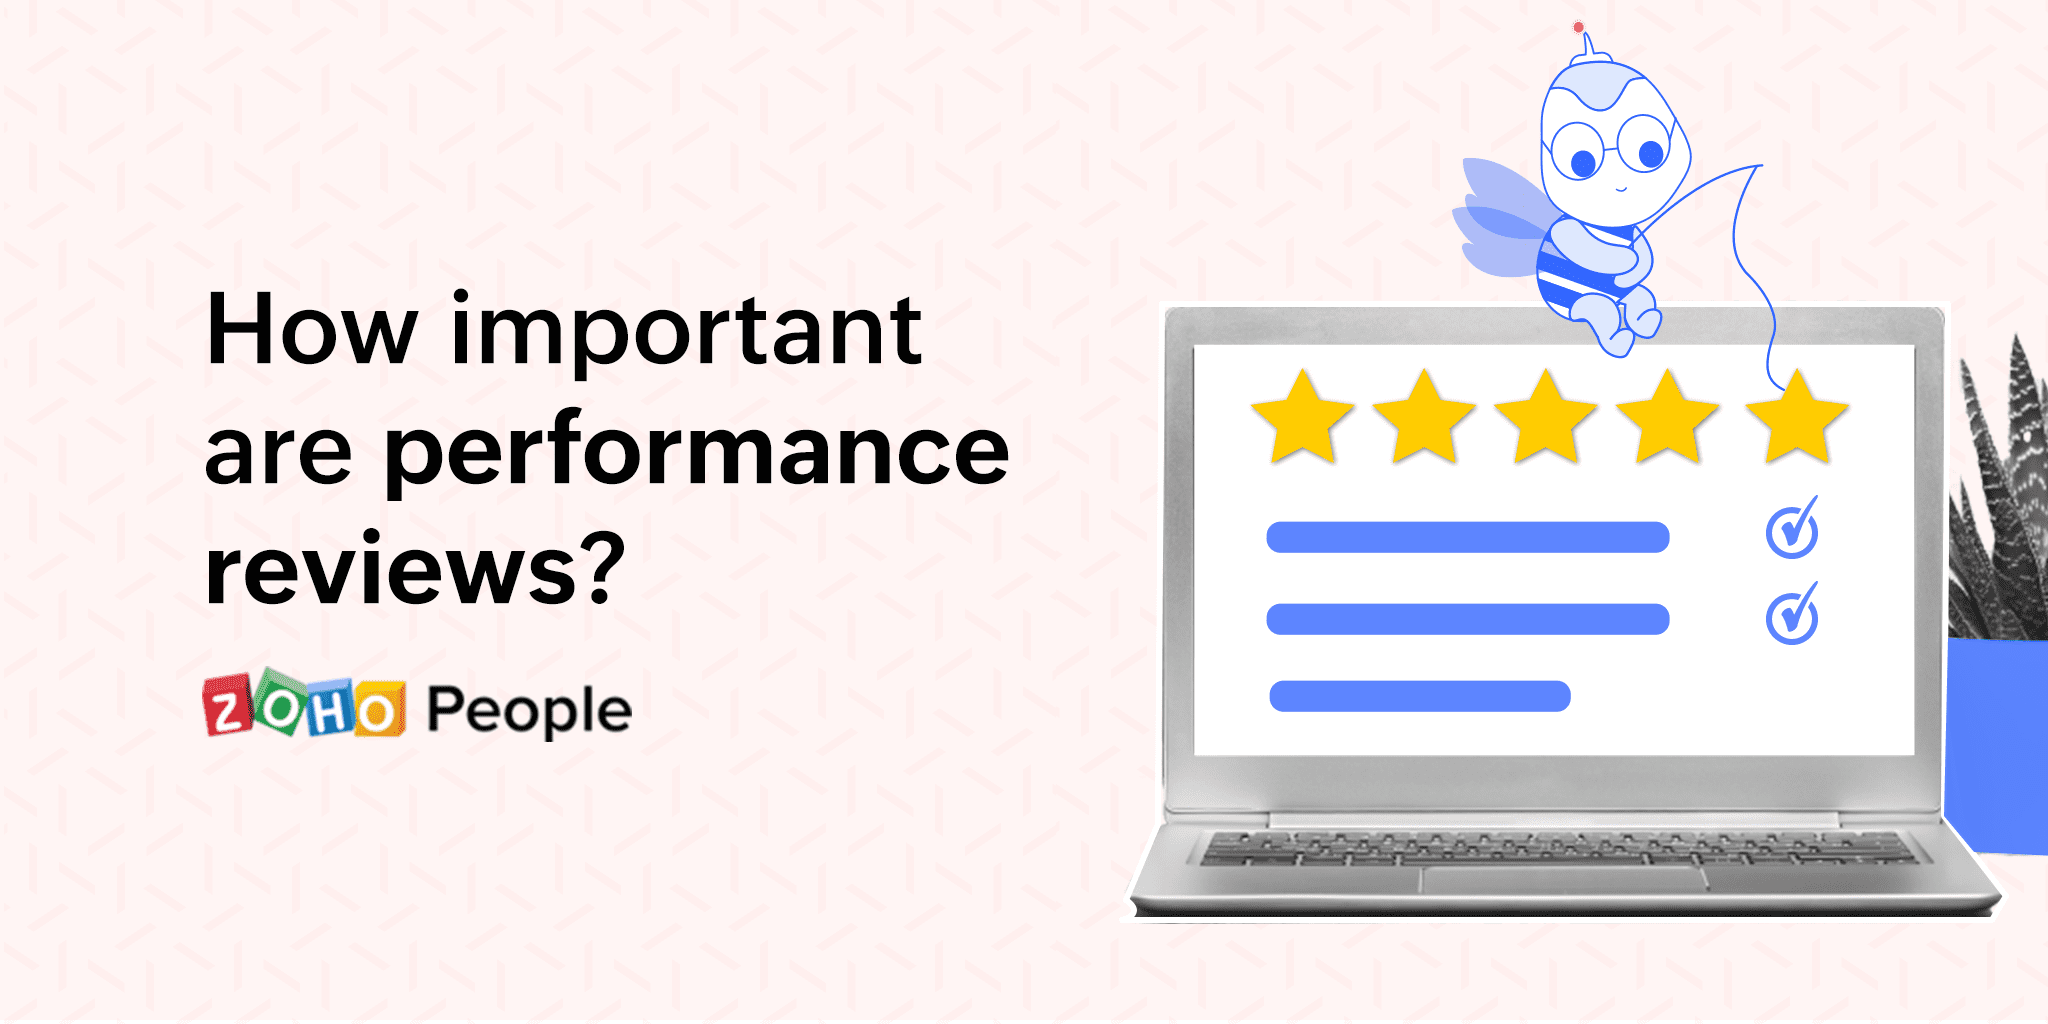 Here's how Performance reviews help small businesses